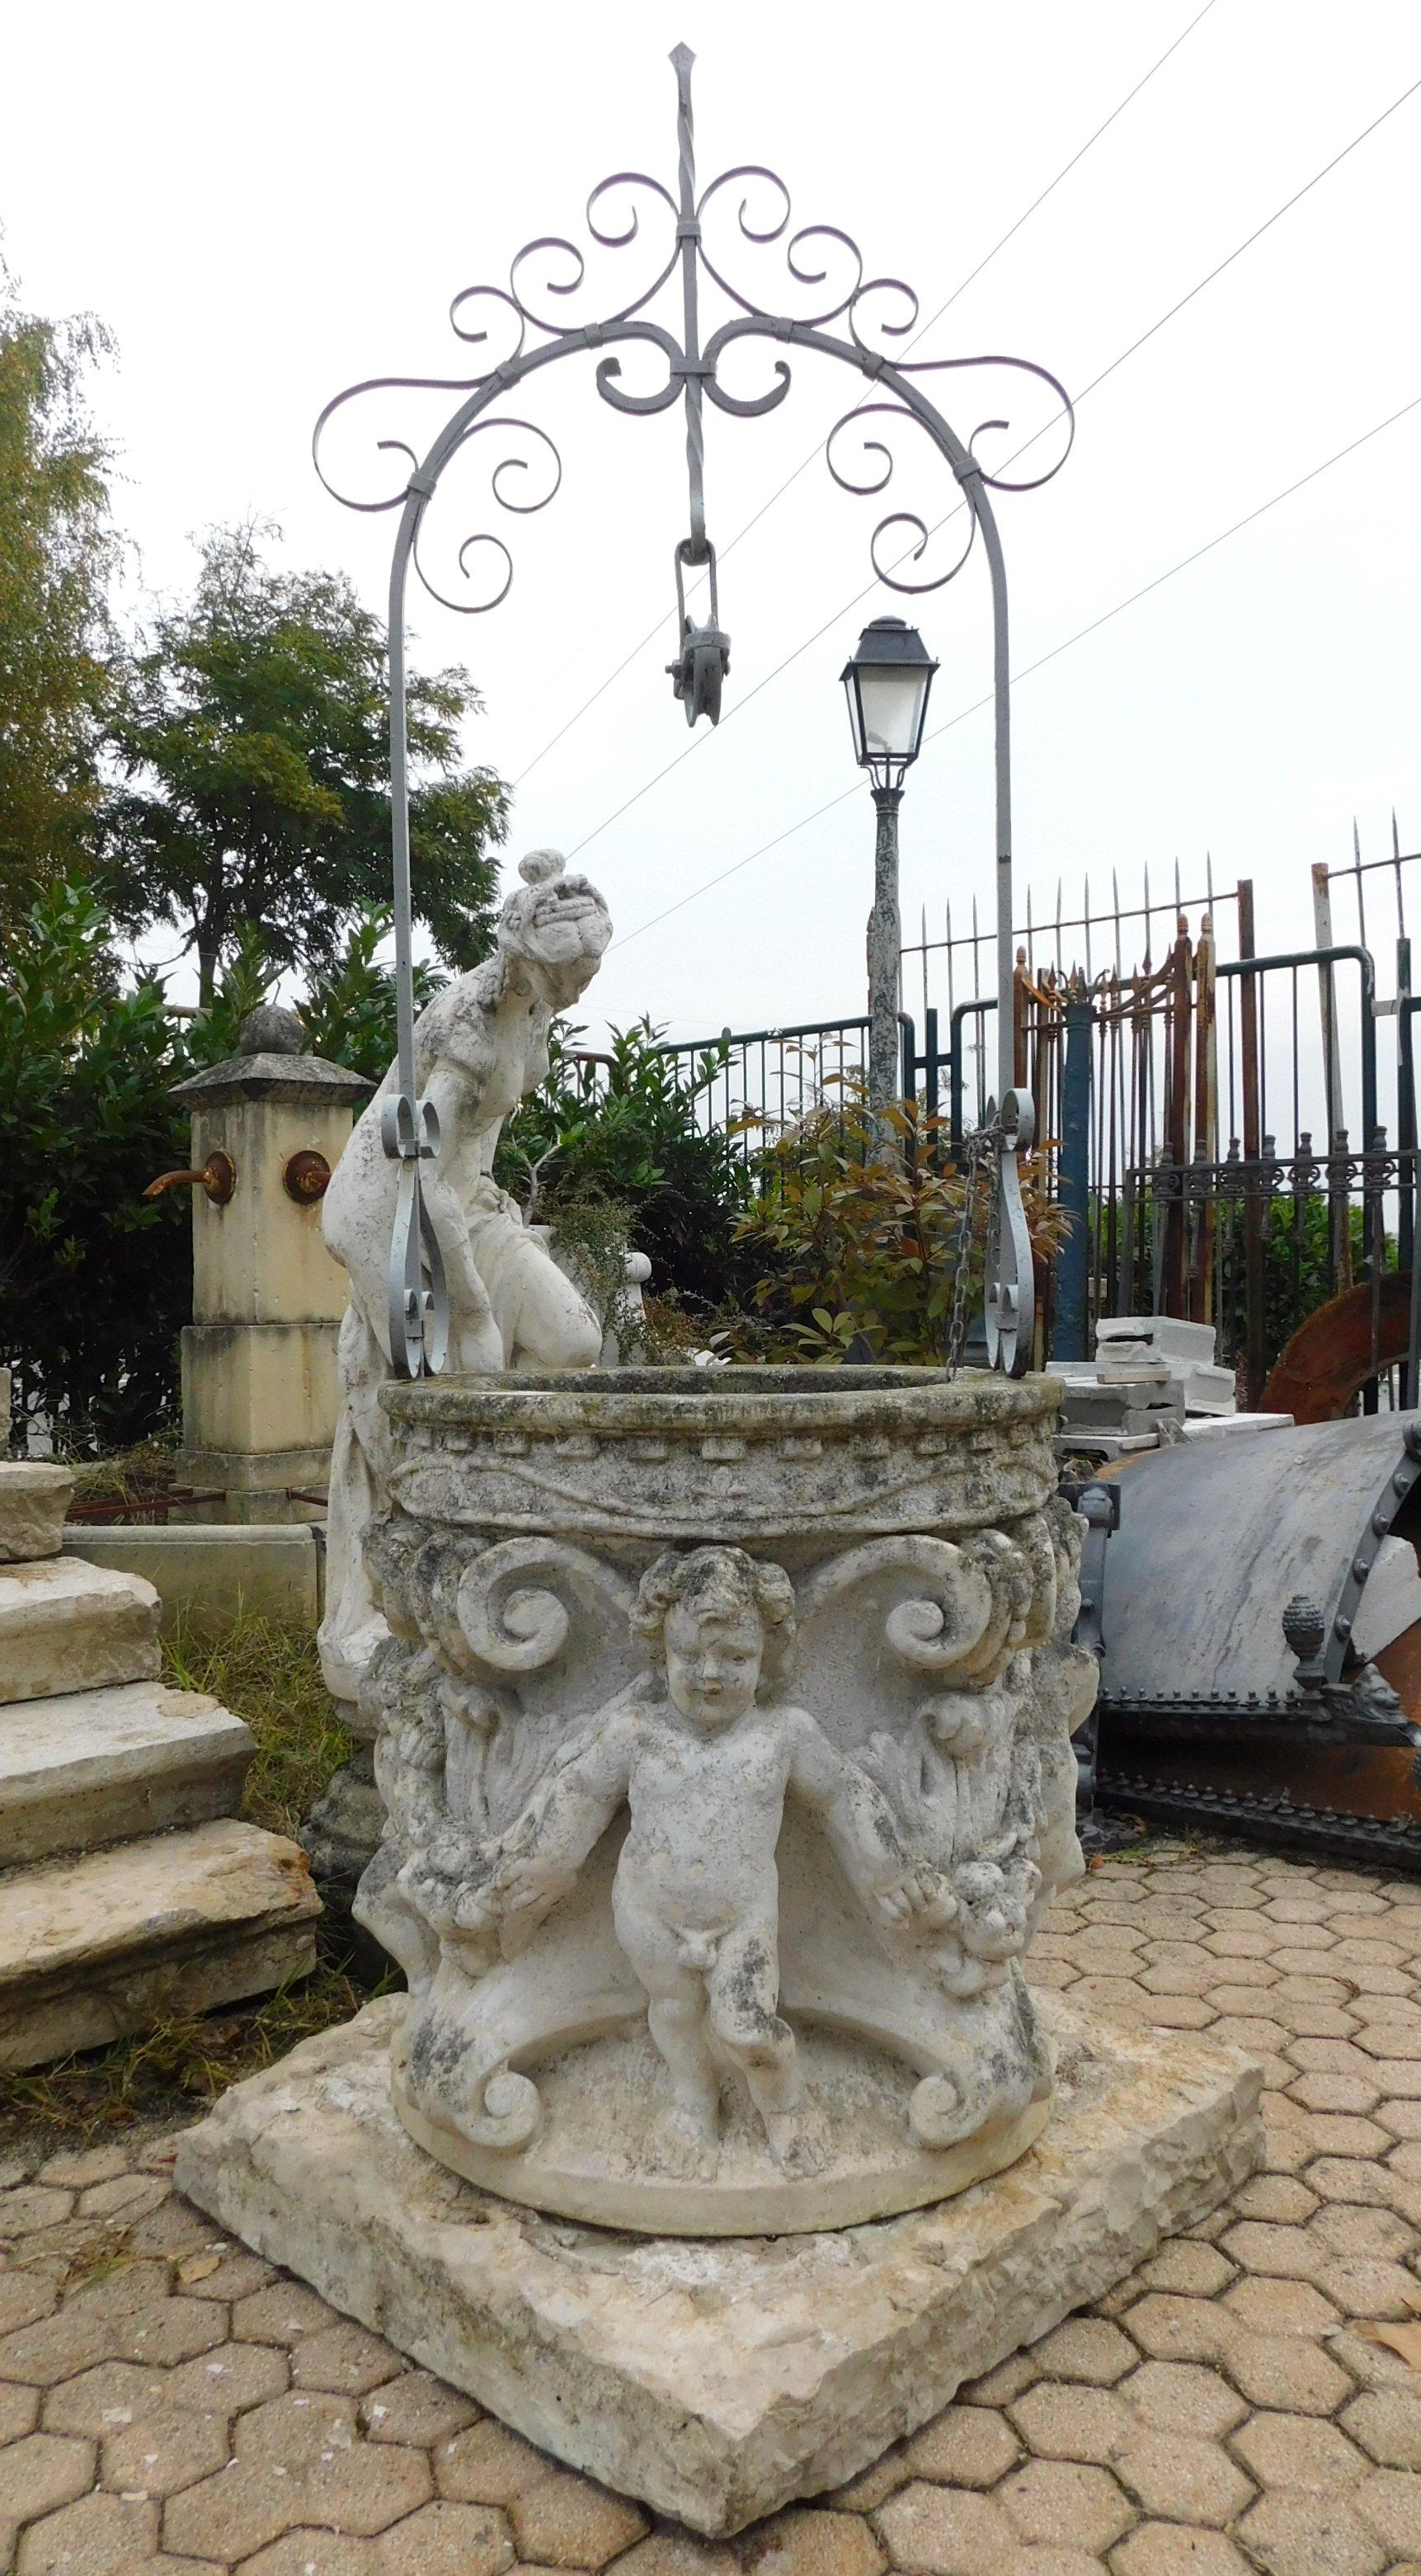 Ancient circular well, in ancient Vicenza stone, with handmade sculptures of cherubs, festoons and decorations of the time, handmade in the 19th century in Northern Italy, for the garden of a noble palace.
Well in very good condition, slightly high